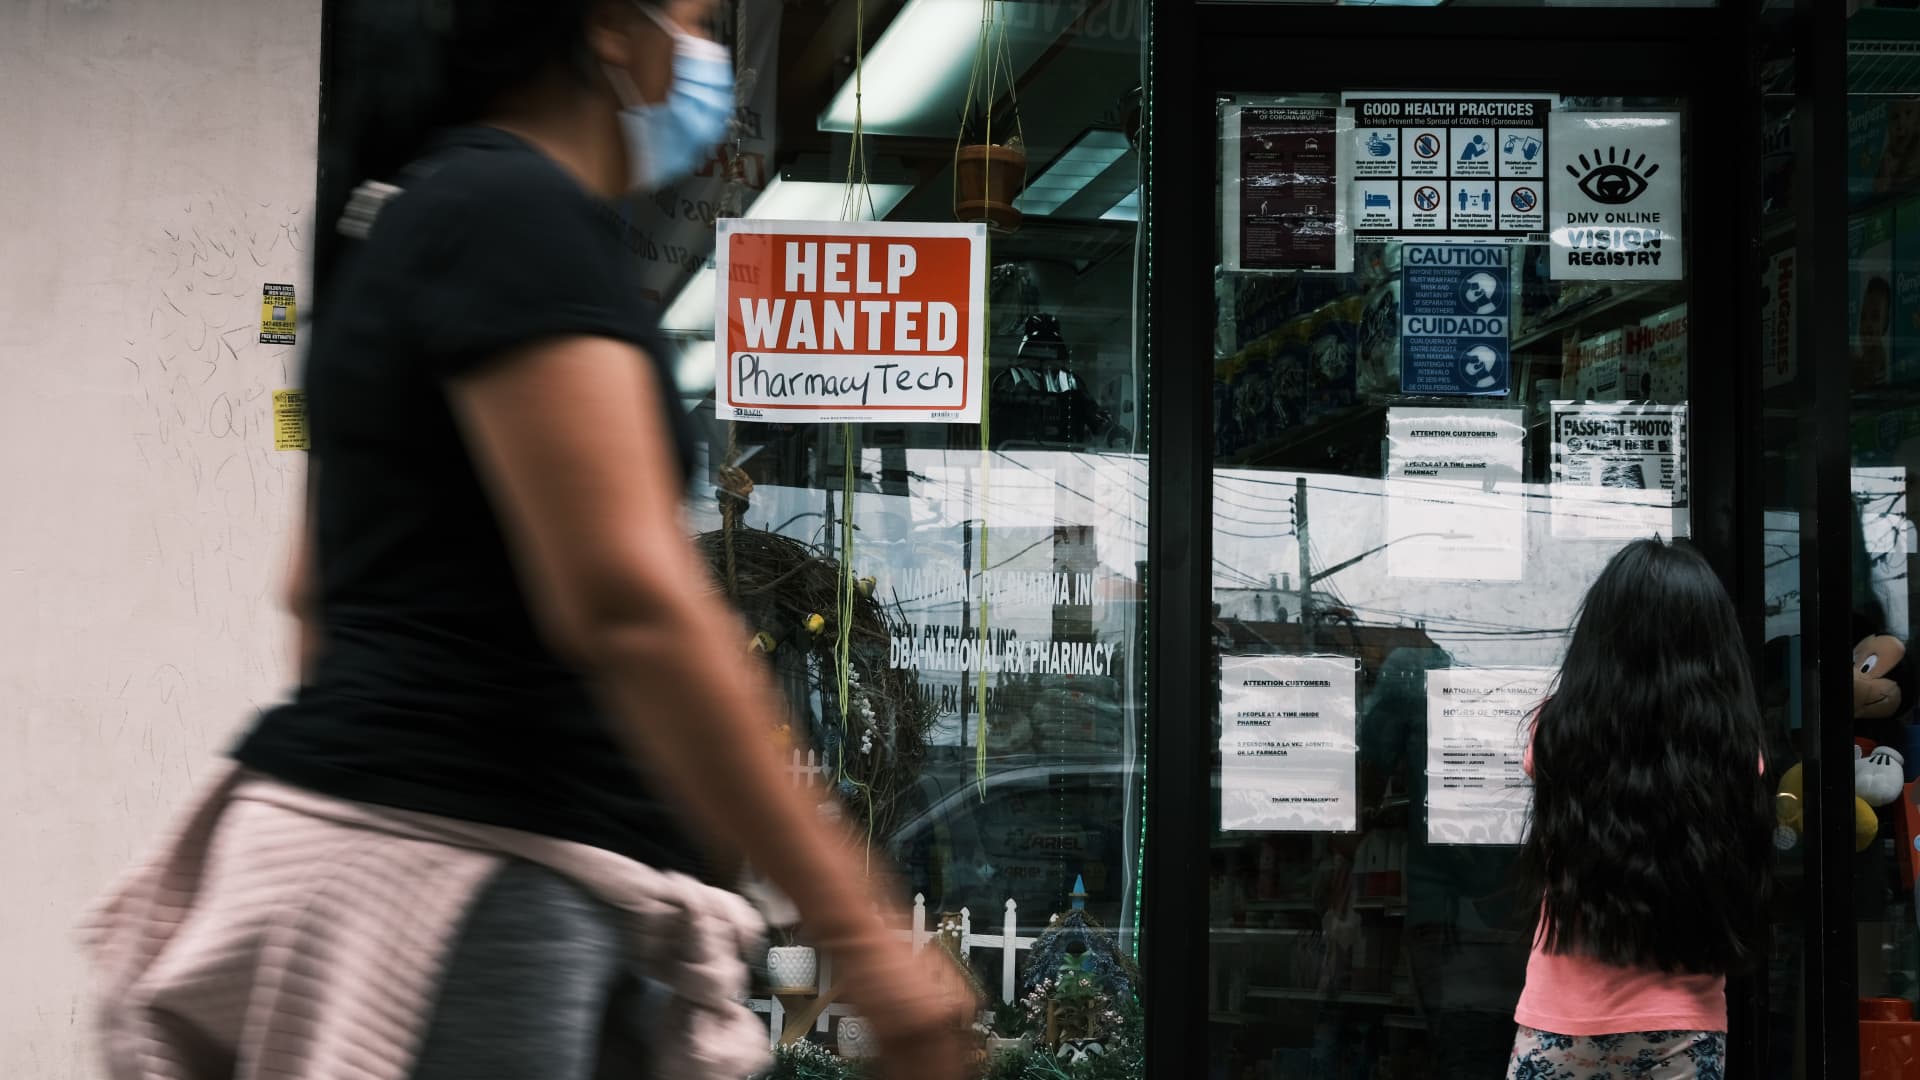 People walk by a Help Wanted sign in the Queens borough of New York City on June 04, 2021 in New York City.